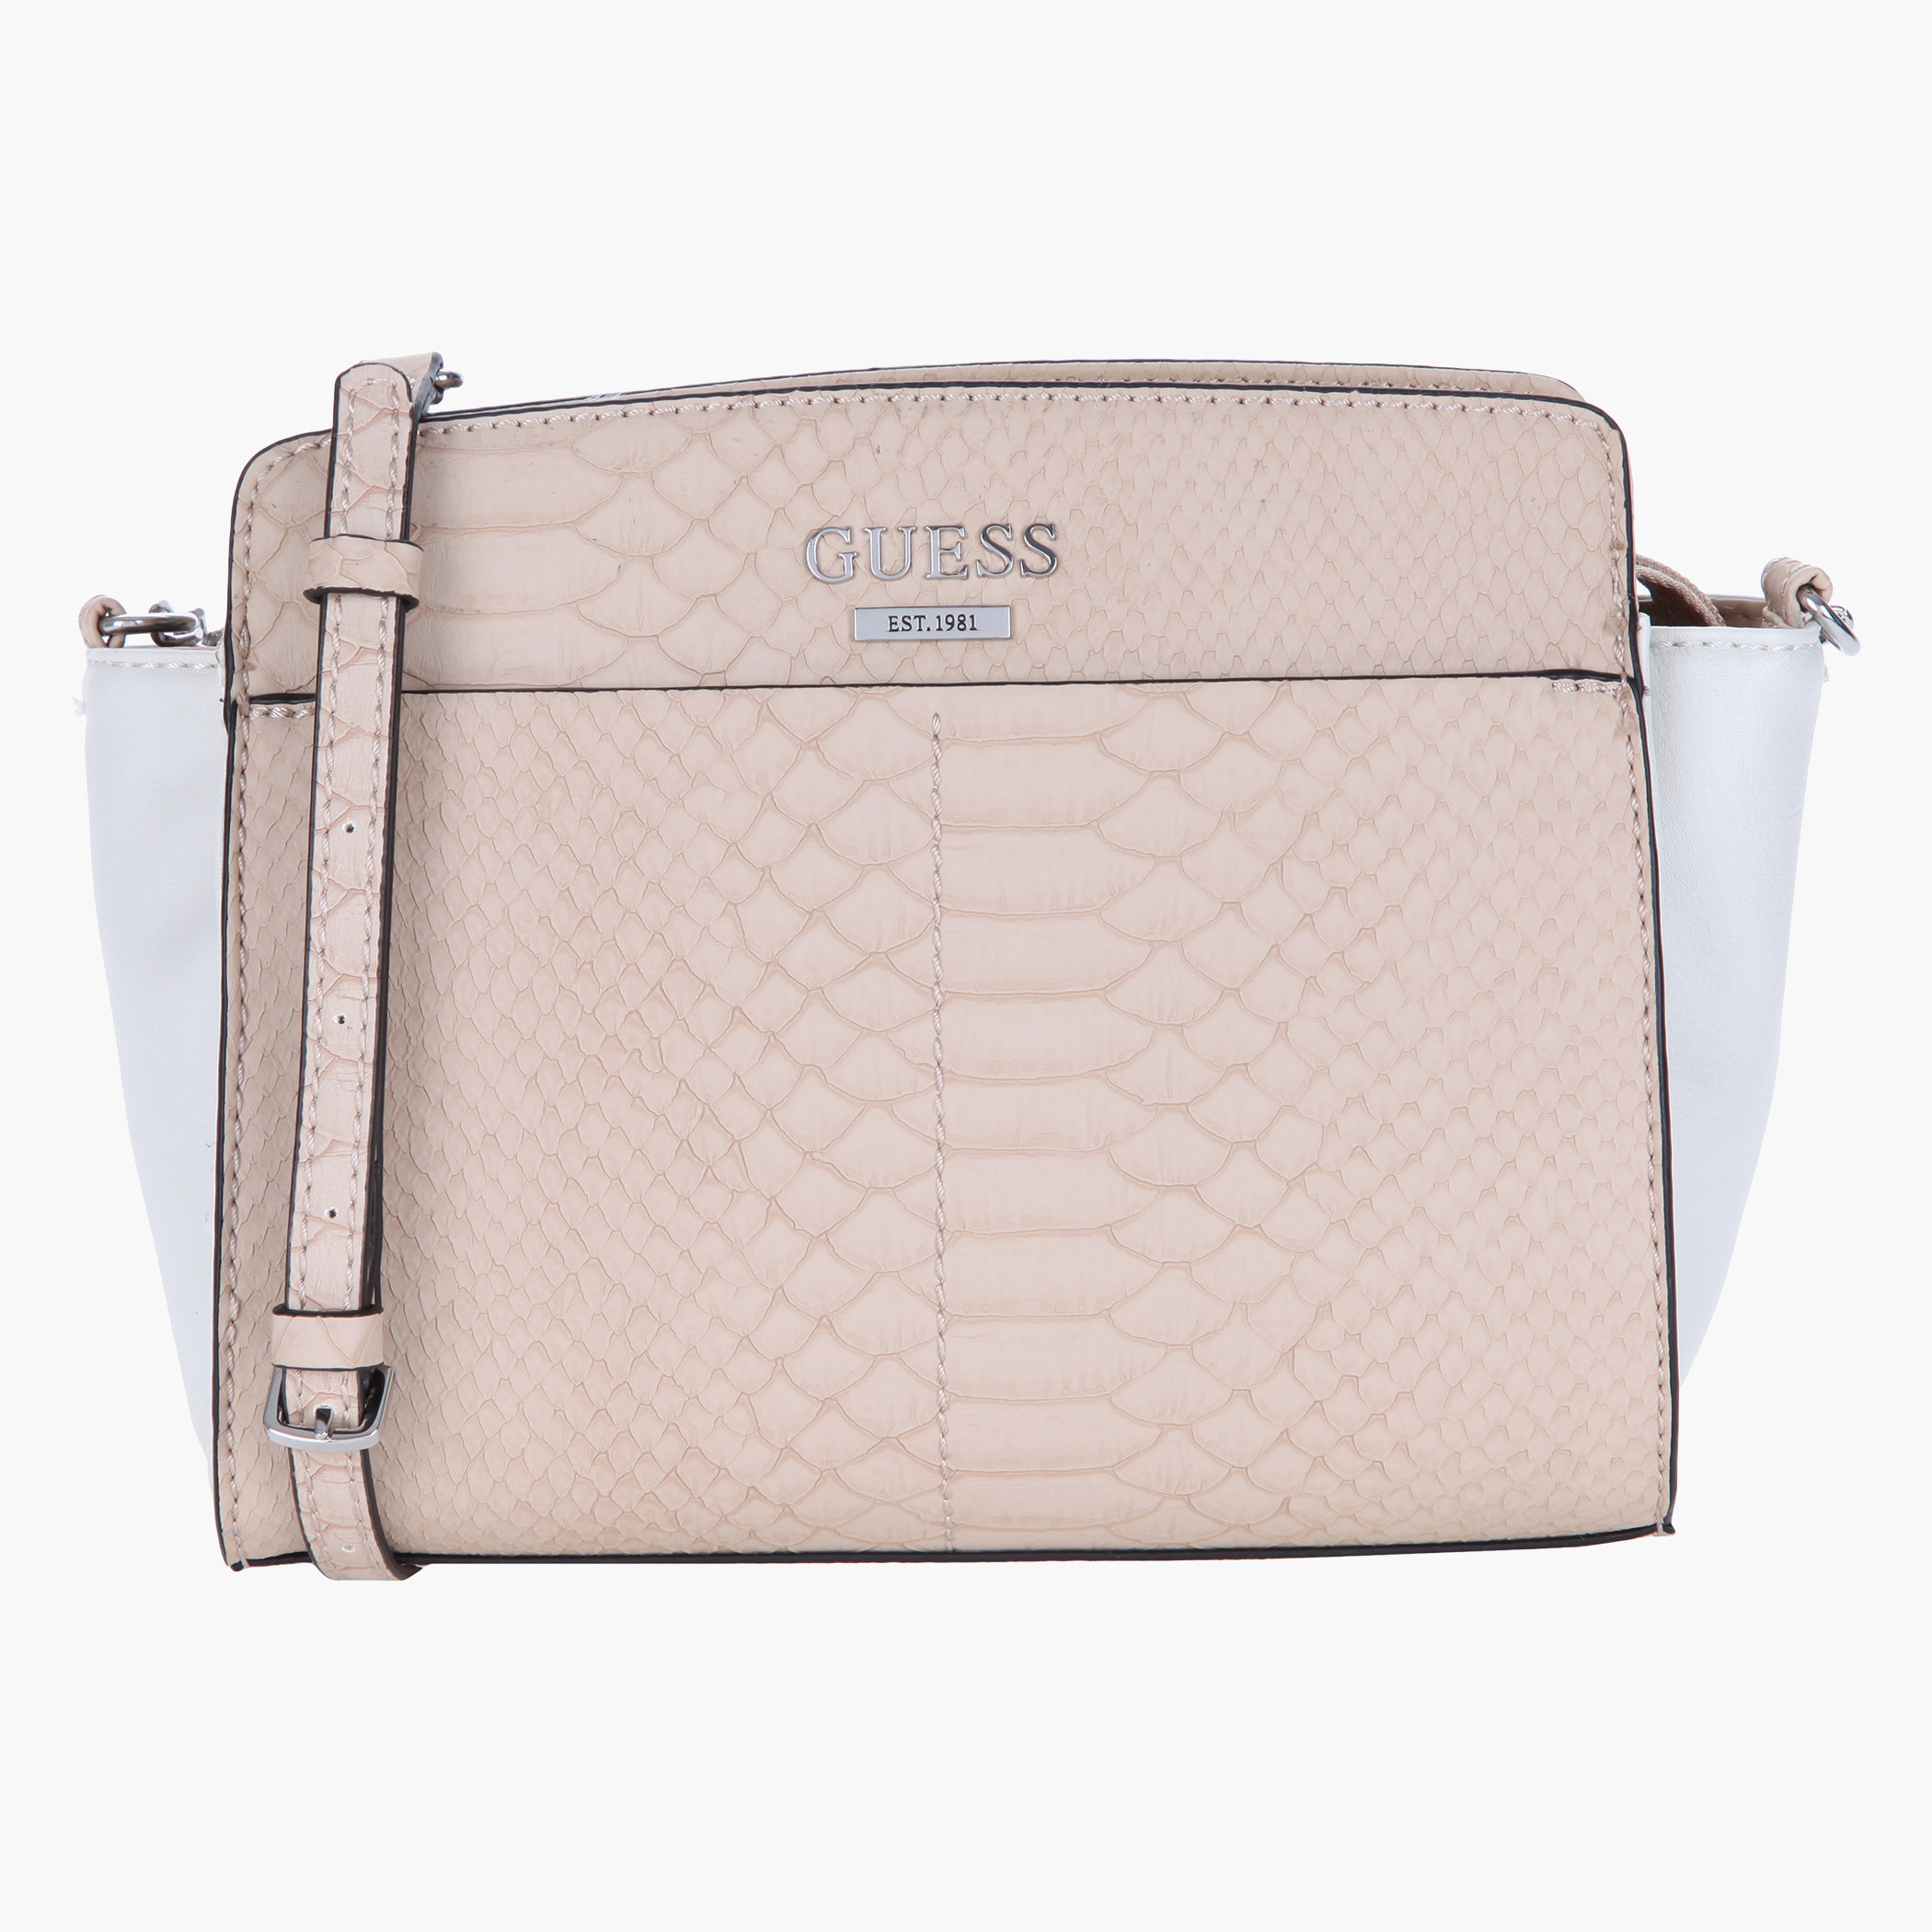 Buy Guess Brynlee Mini Top Zip Shoulder Bag Online | ZALORA Malaysia